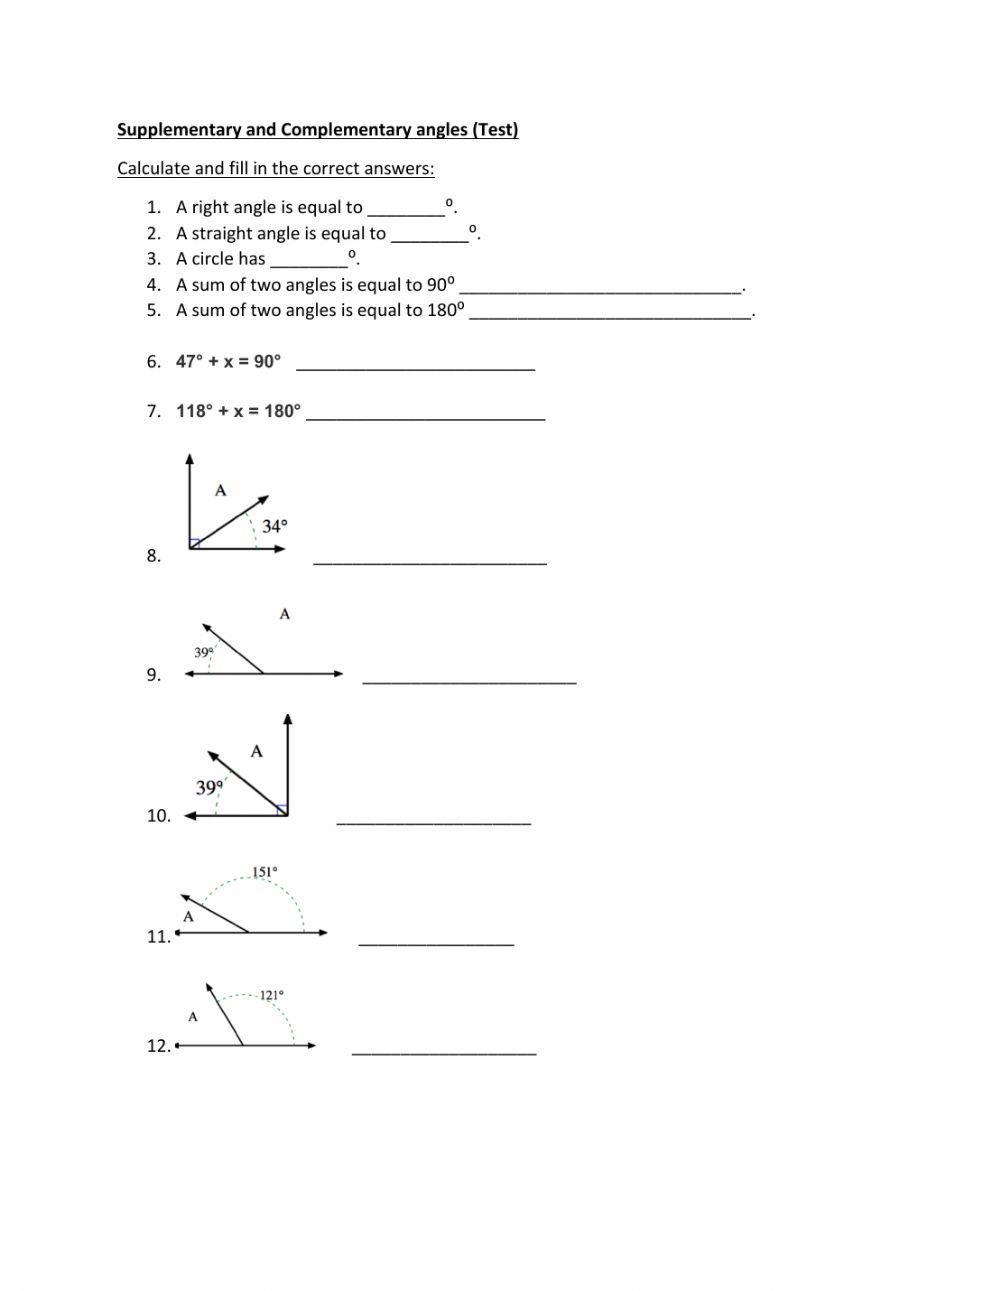 Supplementary and Complementary angles